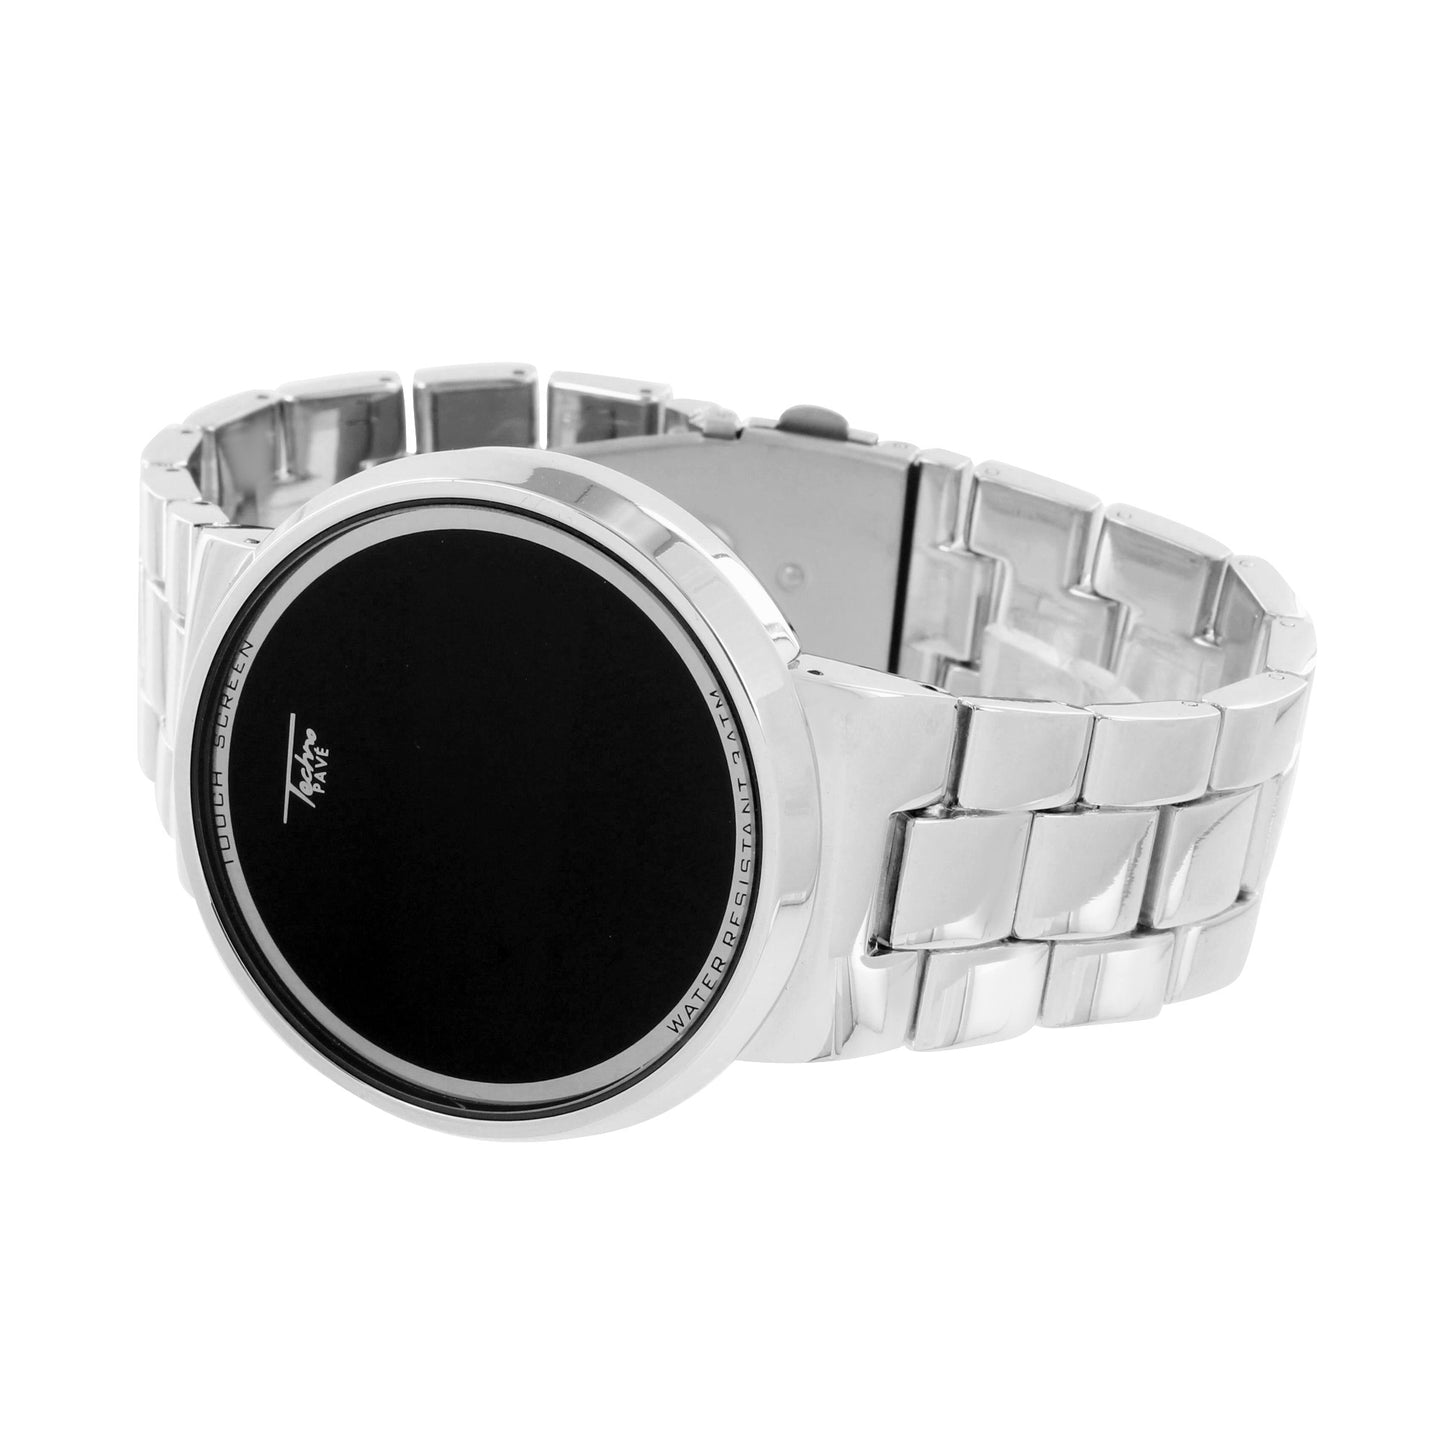 Touch Screen Watch White Techno Pave Digital Display